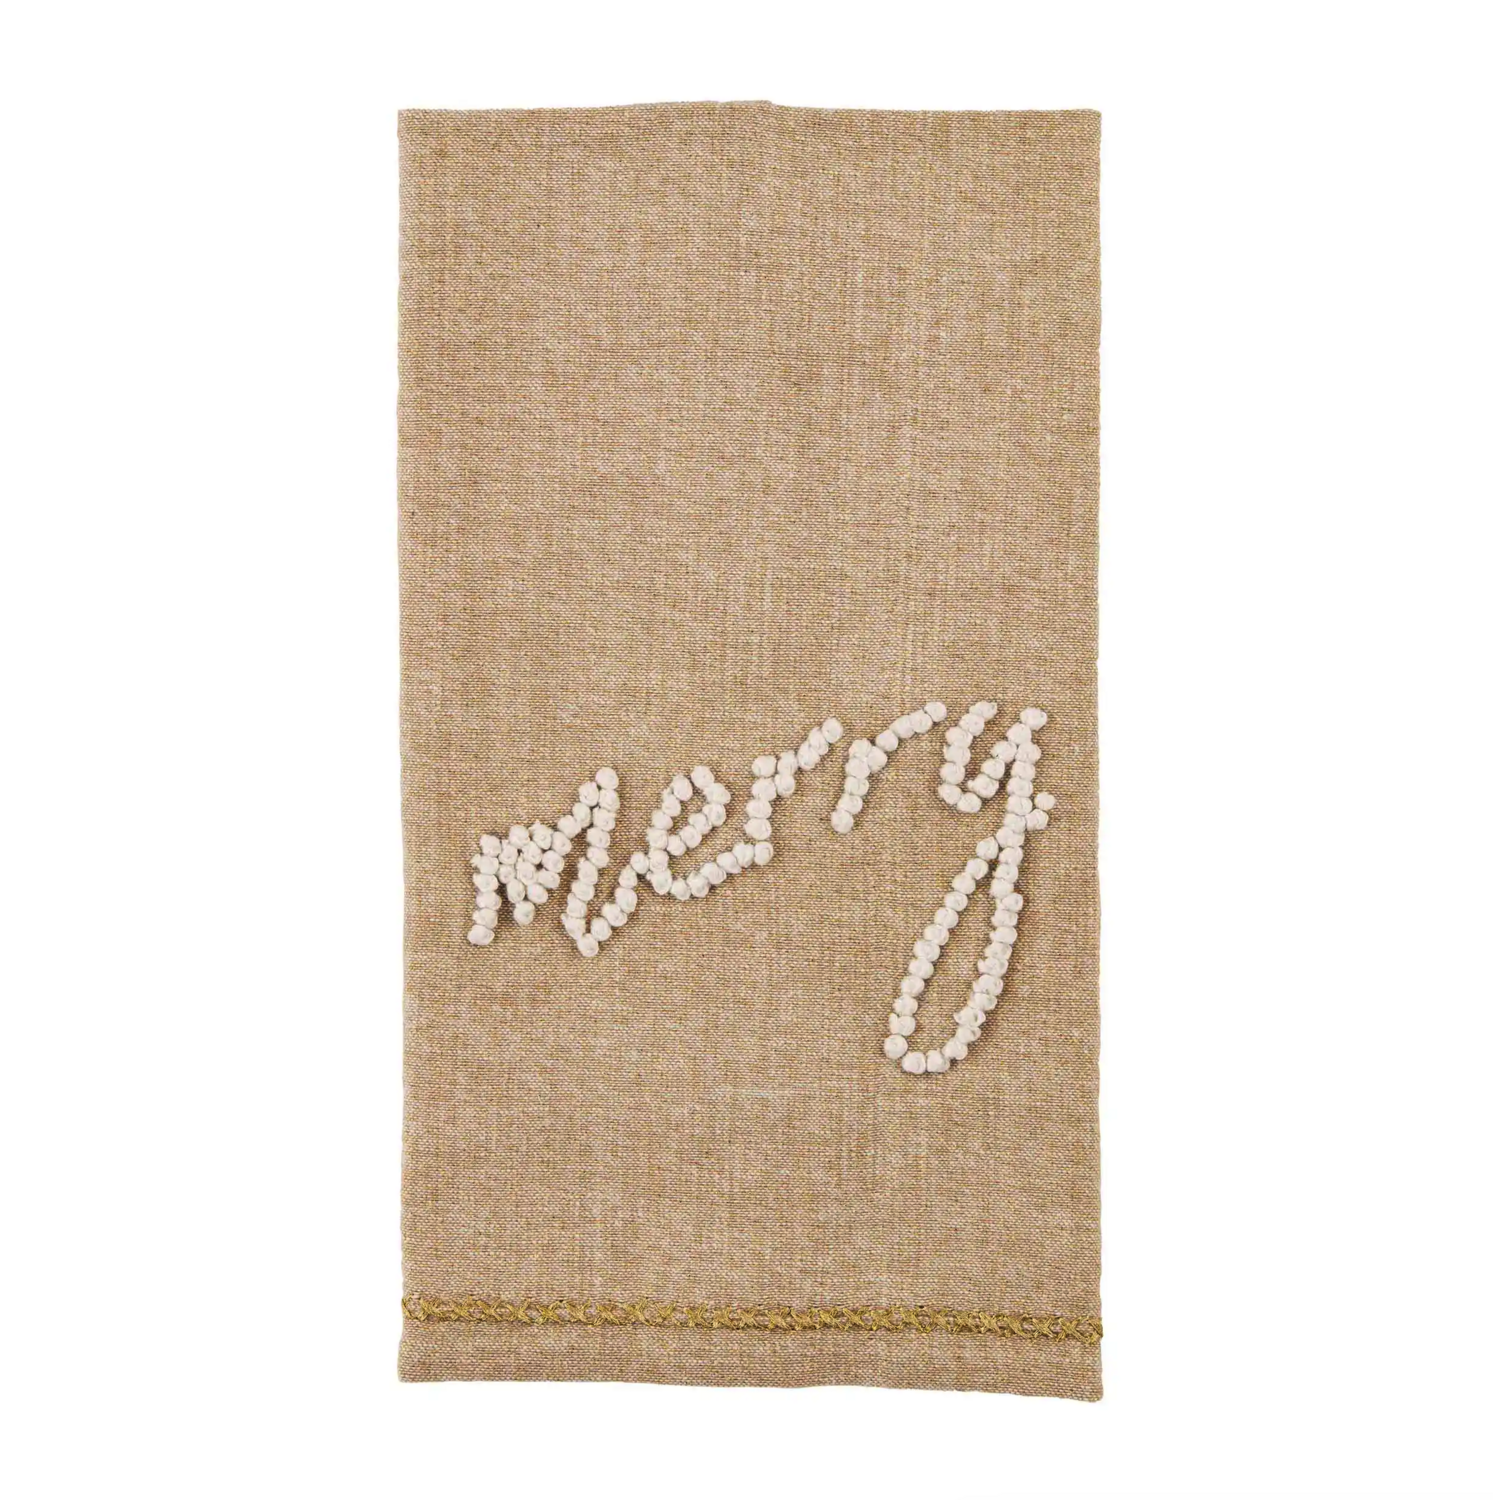 Merry Gold Knot Towel